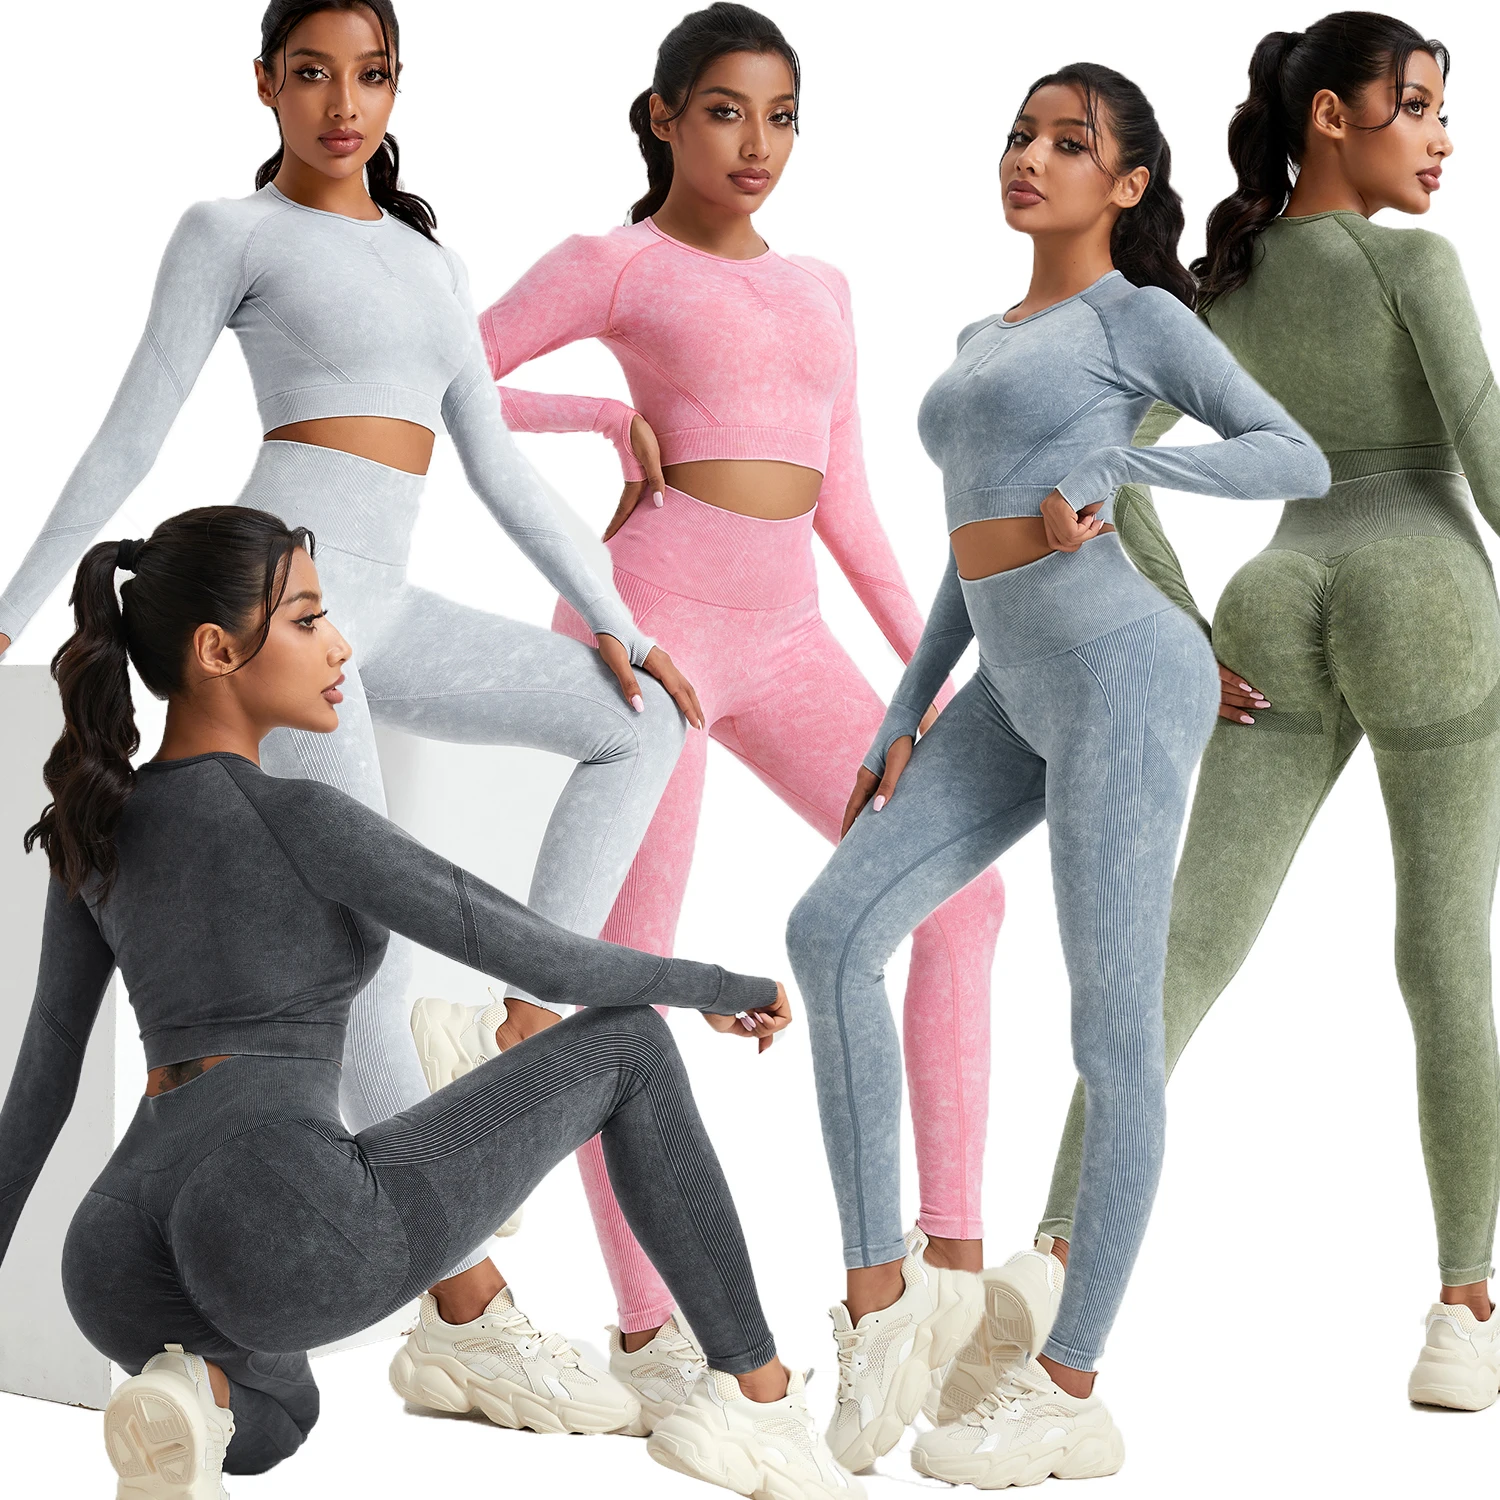 

SALSPOR Wash Push Up Pants Suit for Fitness High Waist Athletic Seamless Sportswear Woman Gym Fashion Casual Sport Pants Suit